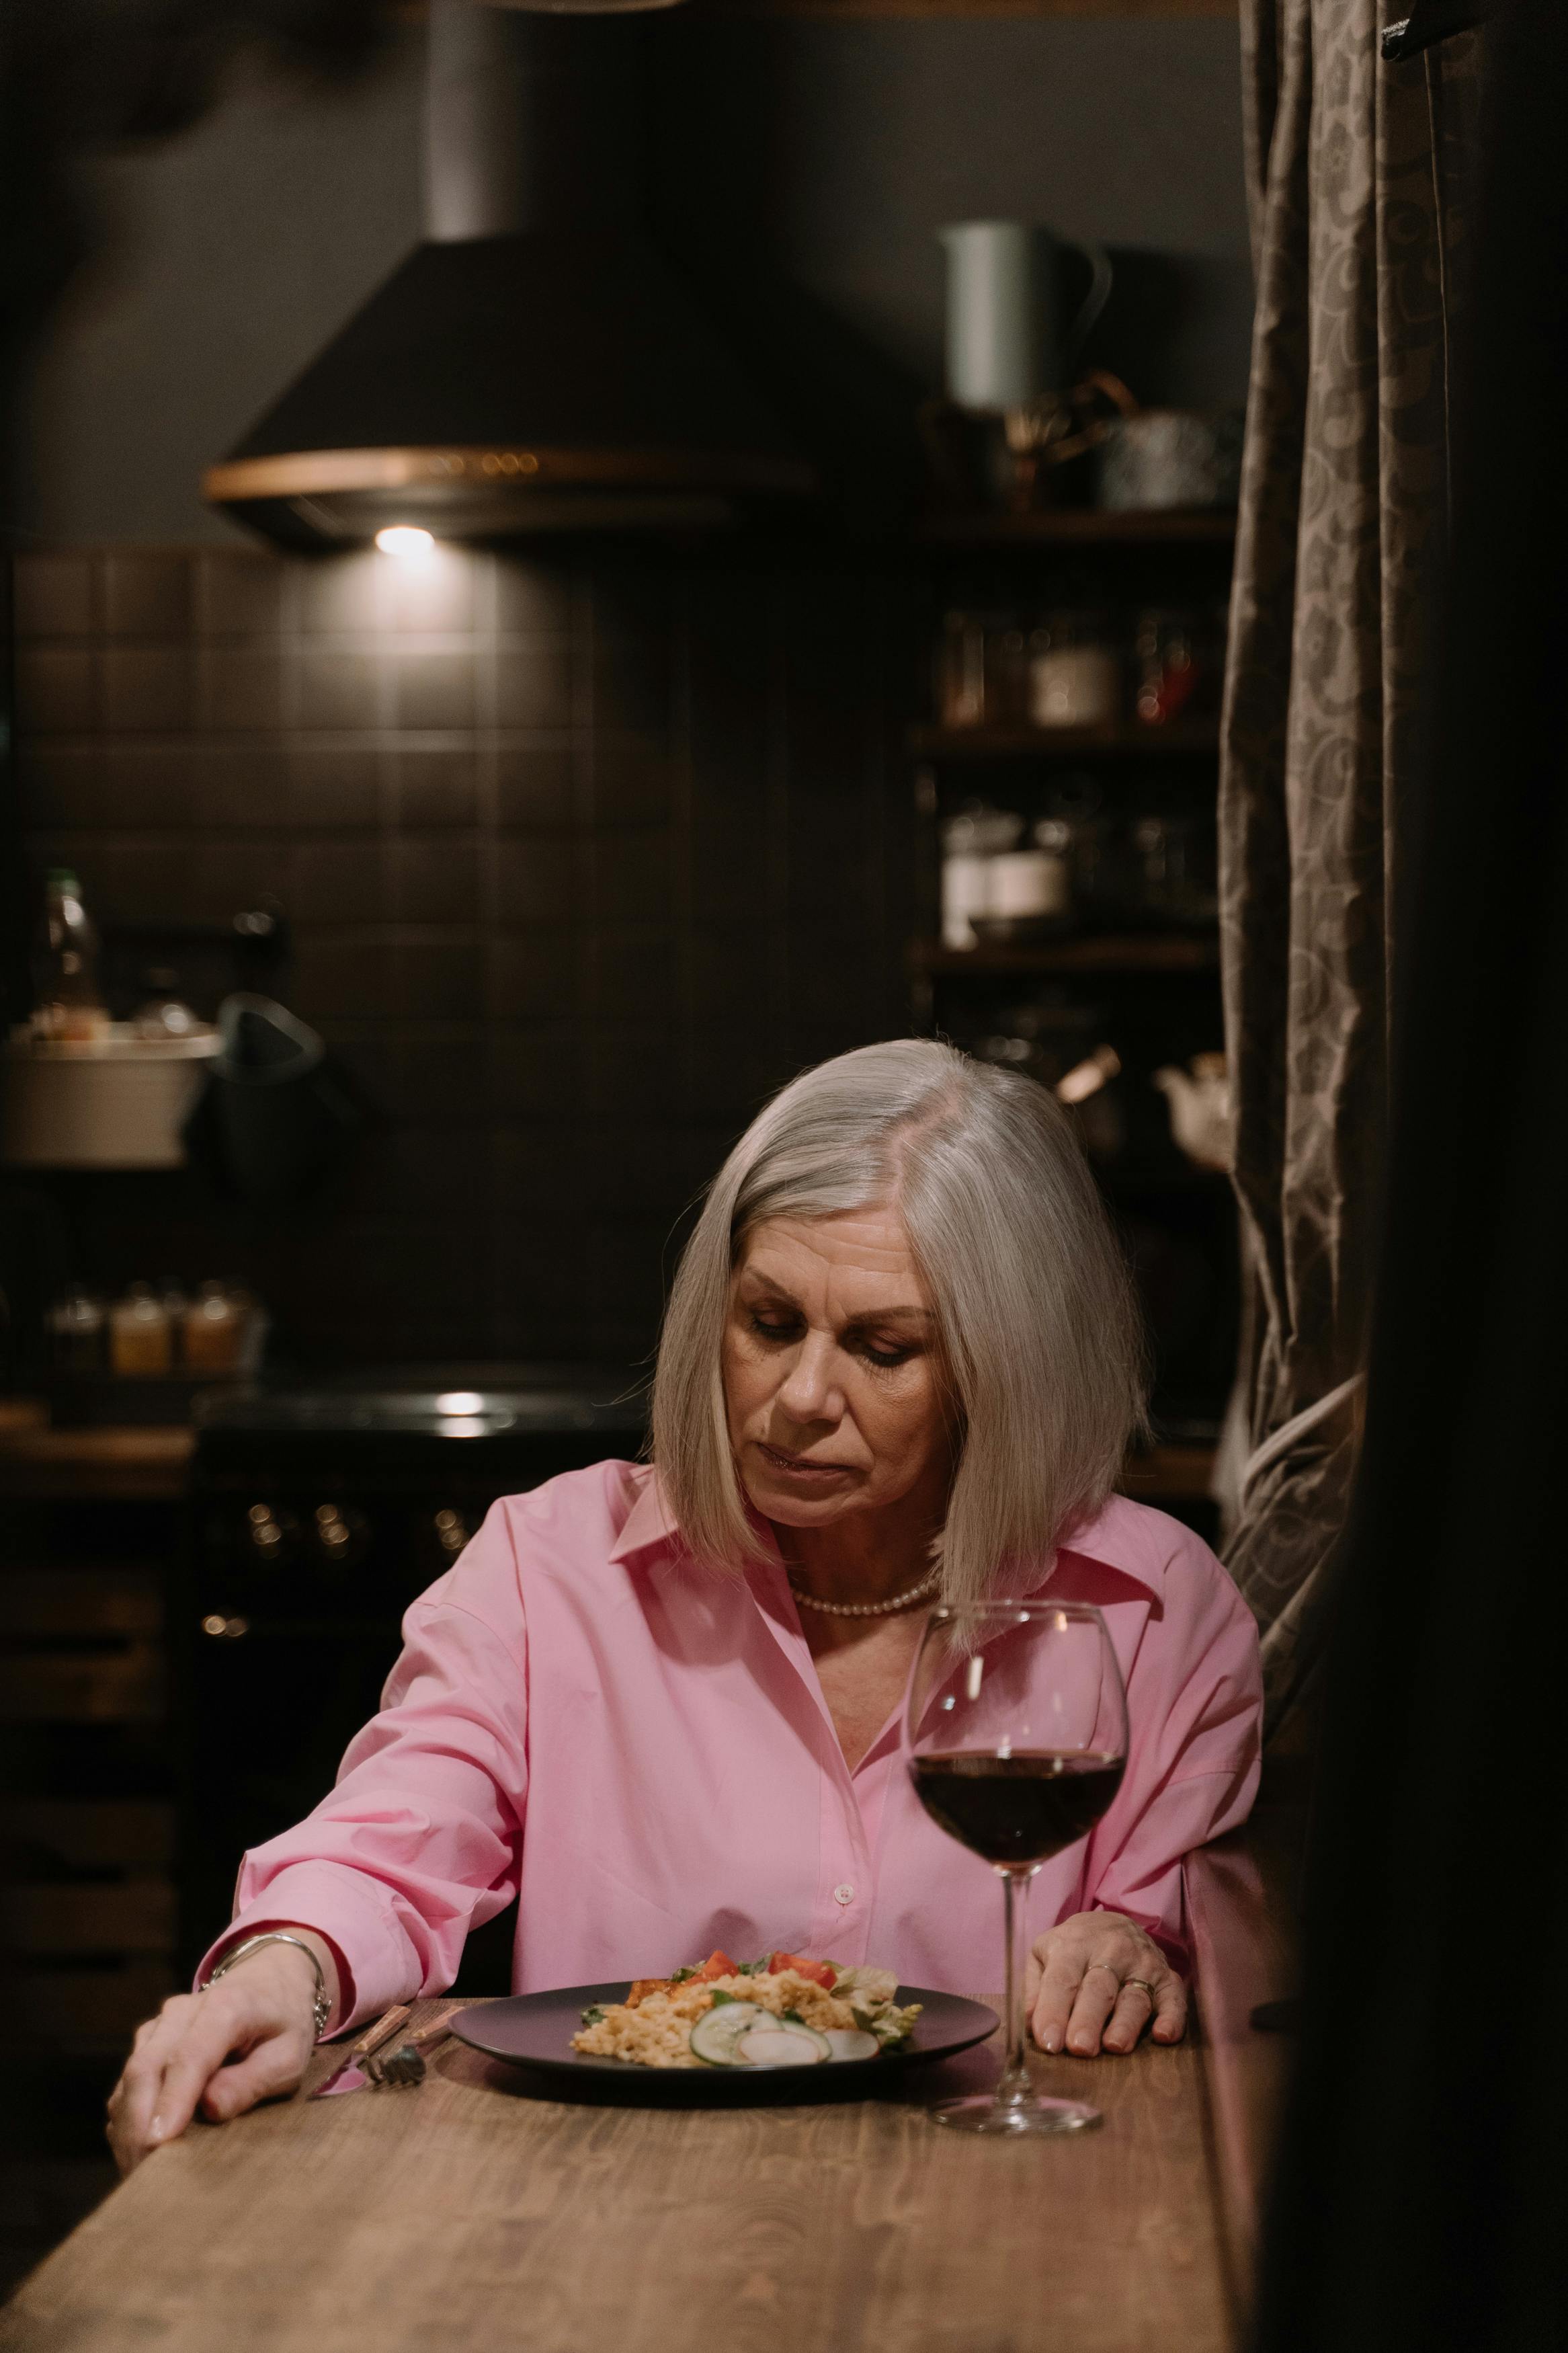 An upset woman at a dinner table | Source: Pexels